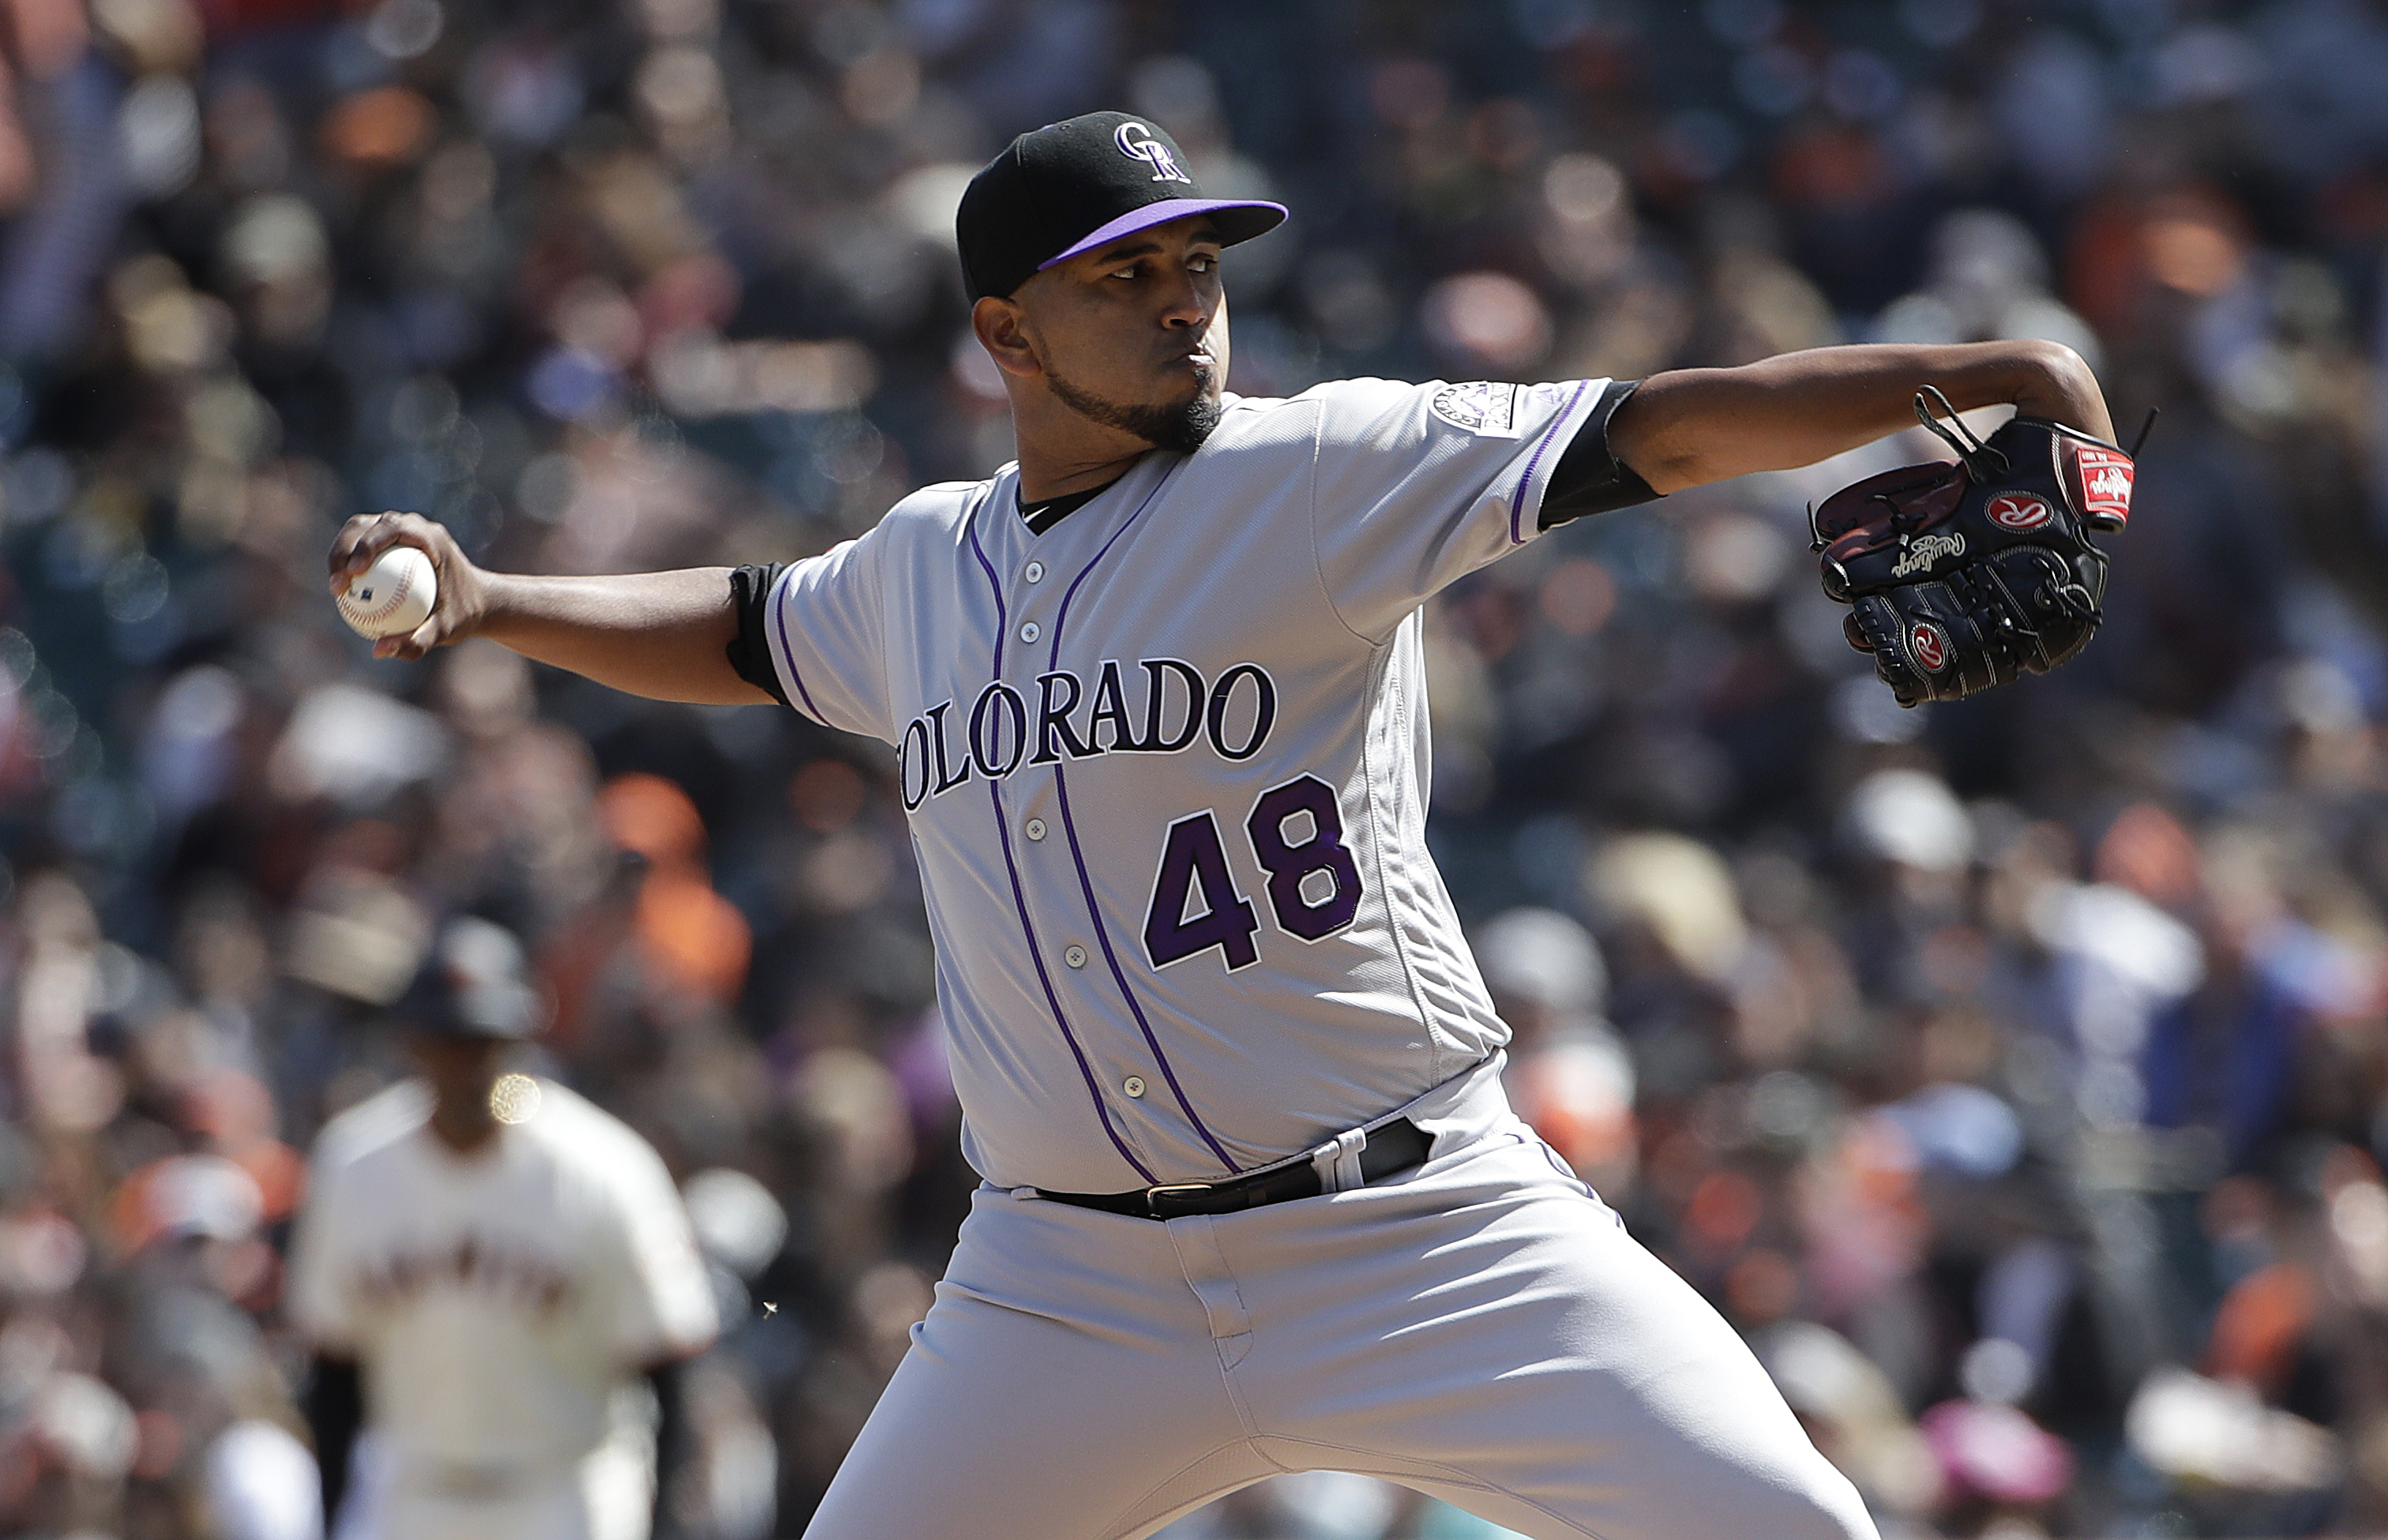 Marquez throws 1-hitter, Rockies top SF 4-0, end 8-game skid